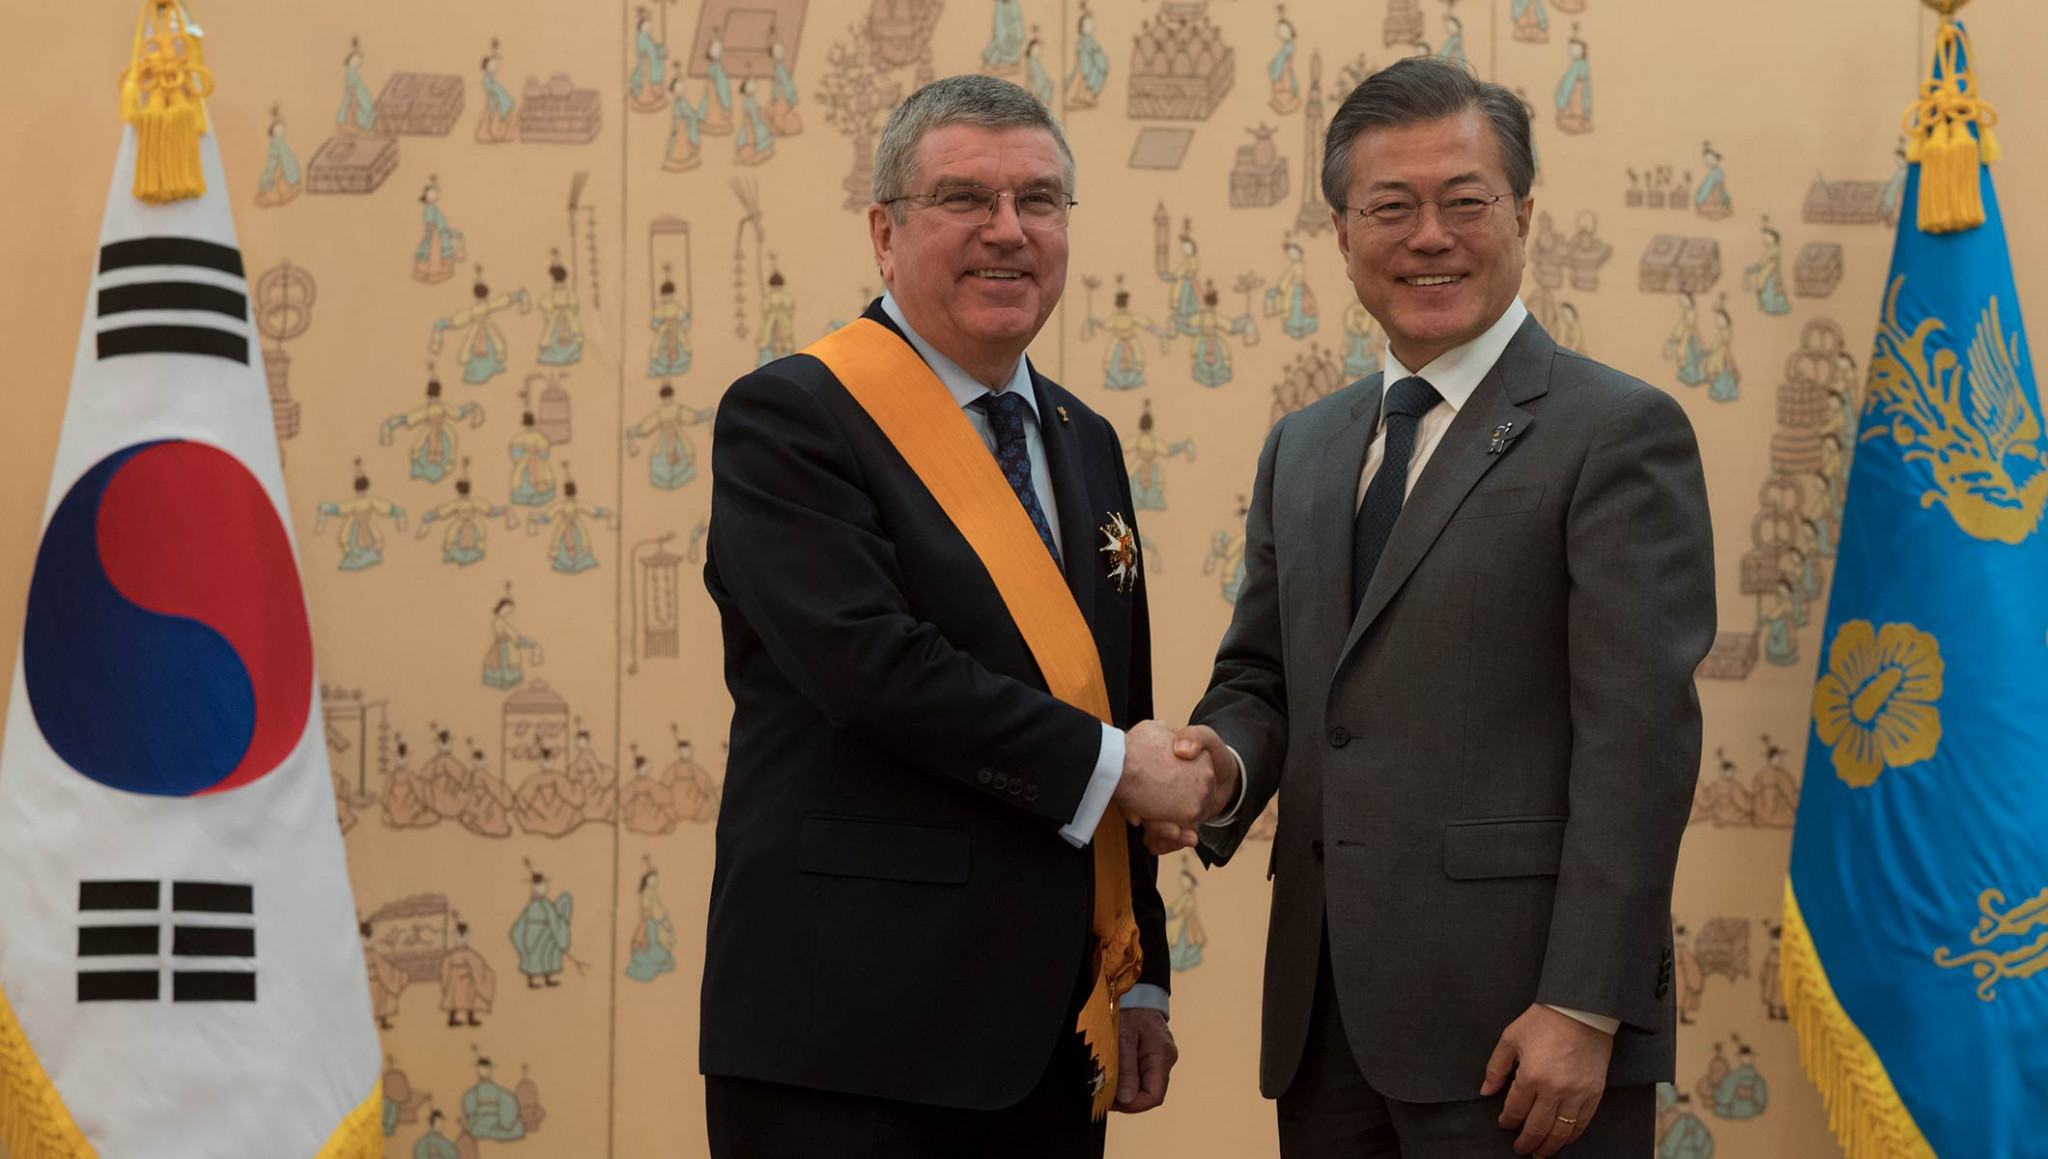 International Olympic Committee head Thomas Bach has received a state medal from South Korean President Moon Jae-in for his contribution to the Pyeongchang 2018 Winter Olympic Games ©IOC